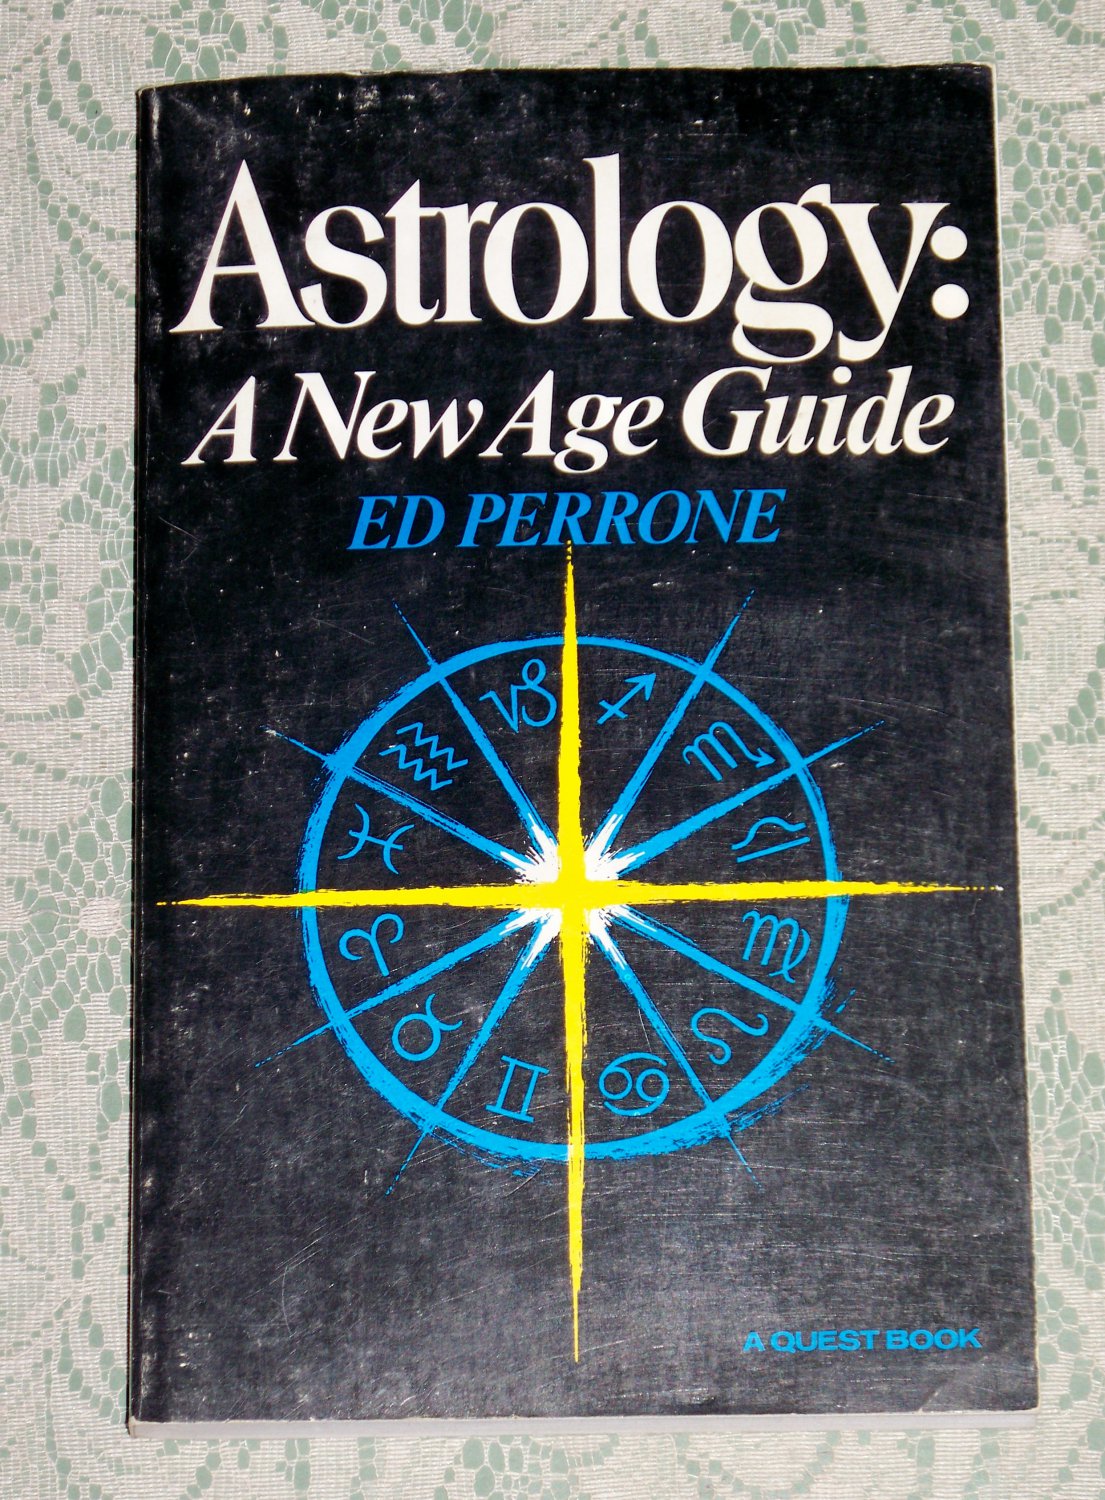 Astrology: A New Age Guide by Ed Perrone 1983 copyright papaerback ...